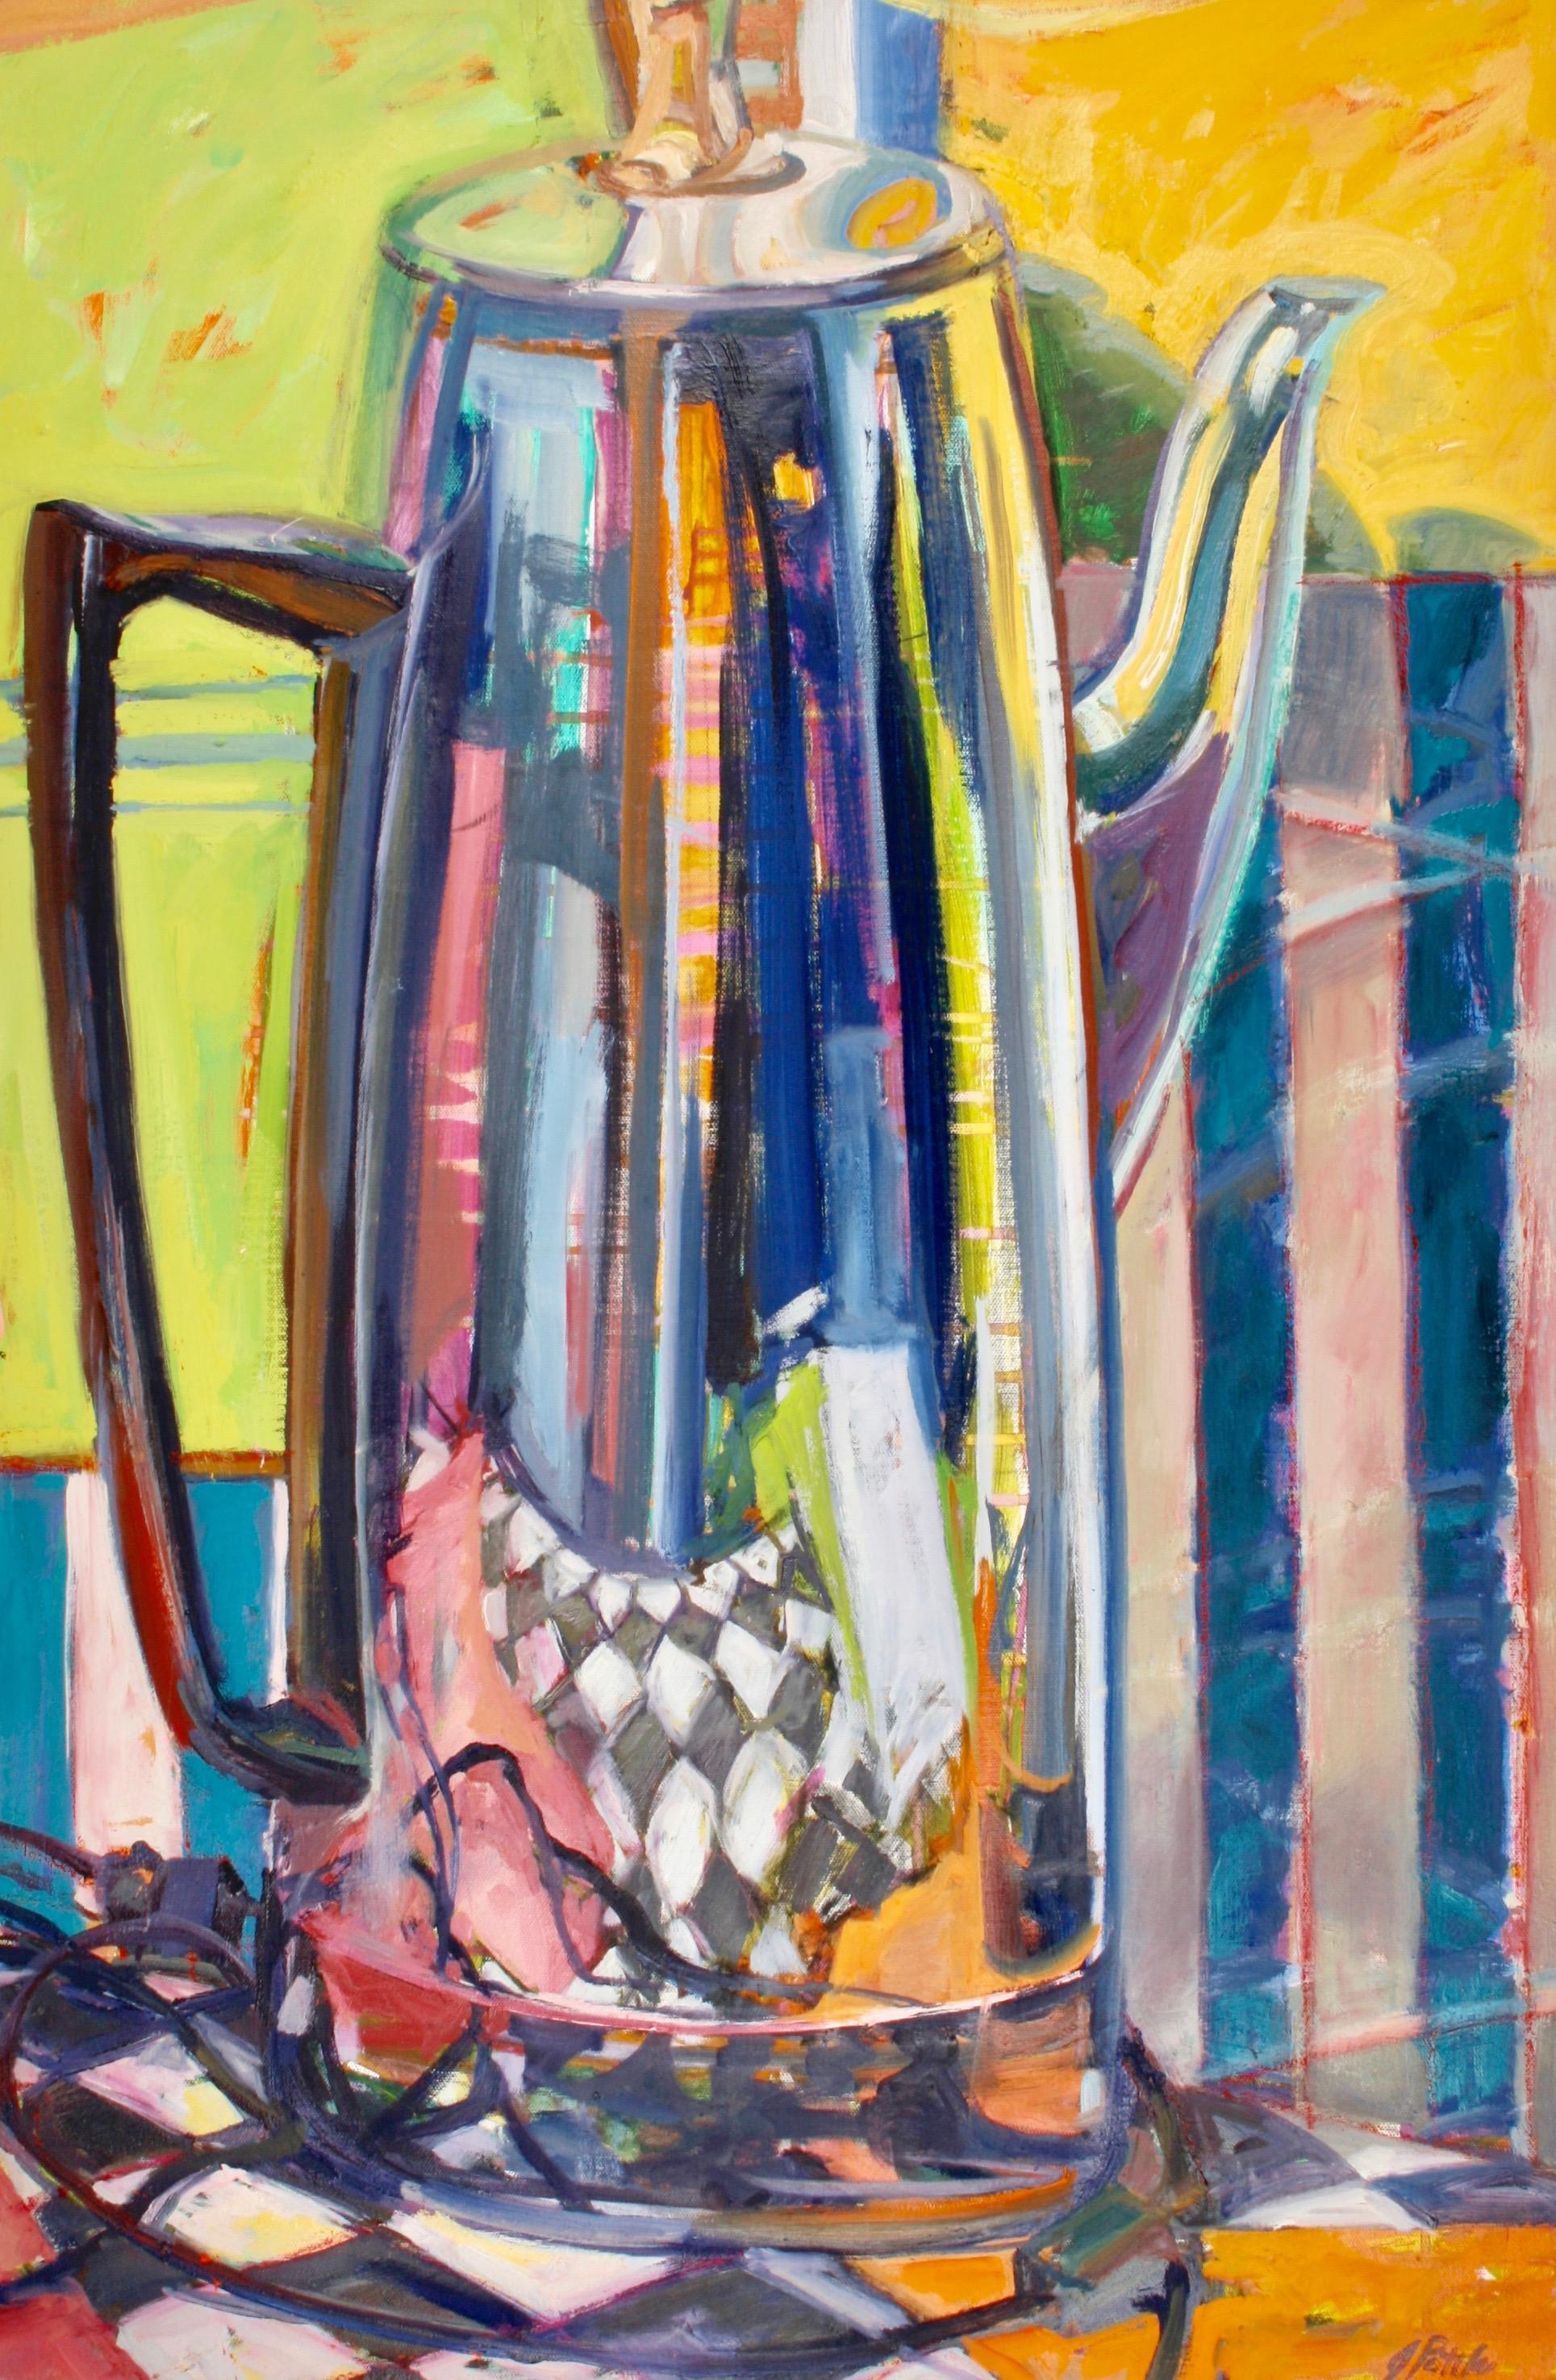 "Silver Pot I", contemporary, still life, retro, acrylic, oil, painting - Painting by Jill Pottle